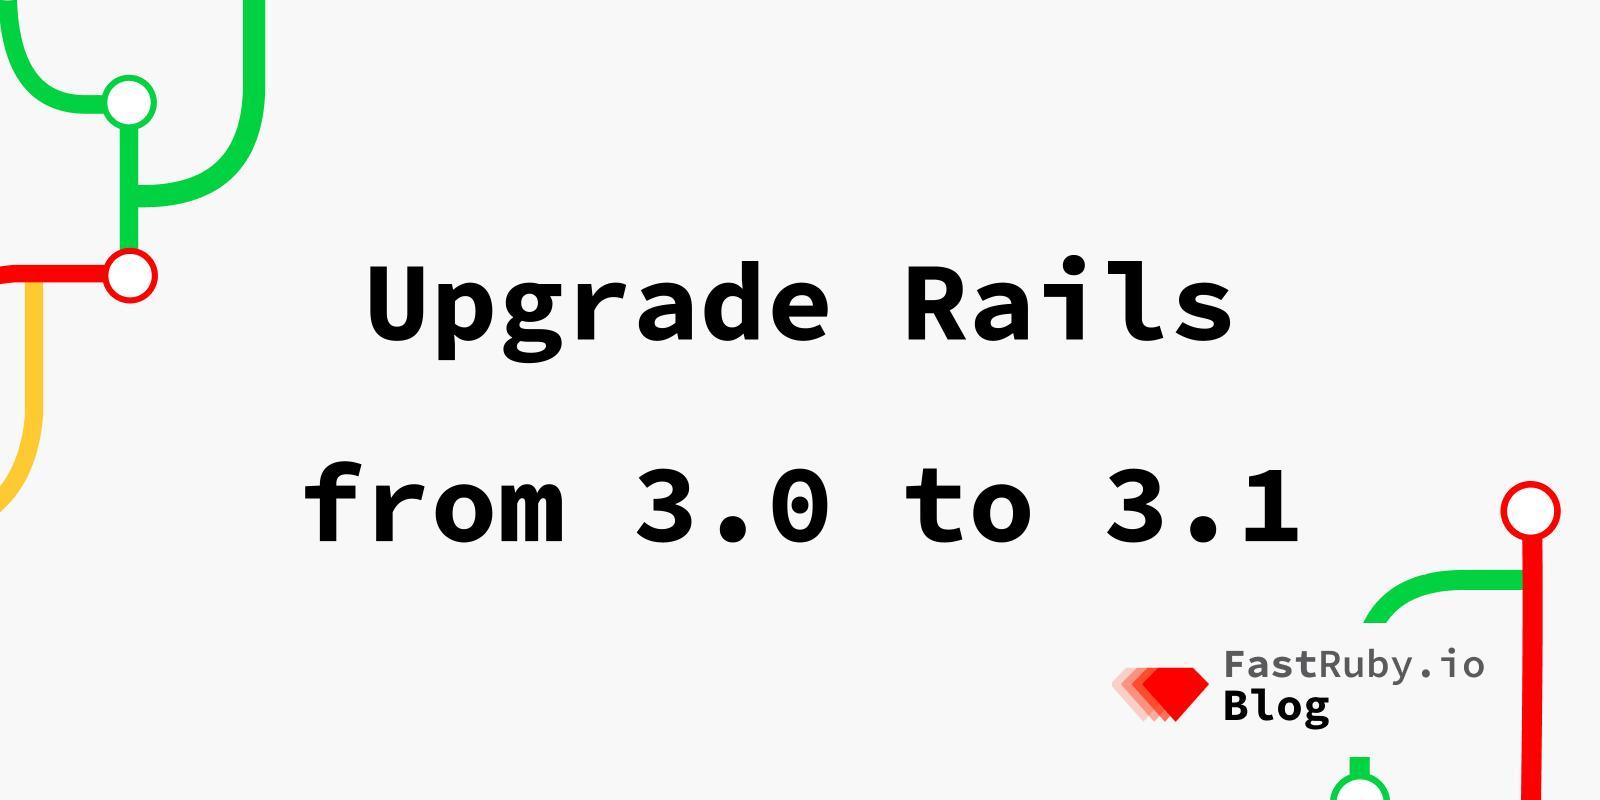 Upgrade Rails from 3.0 to 3.1